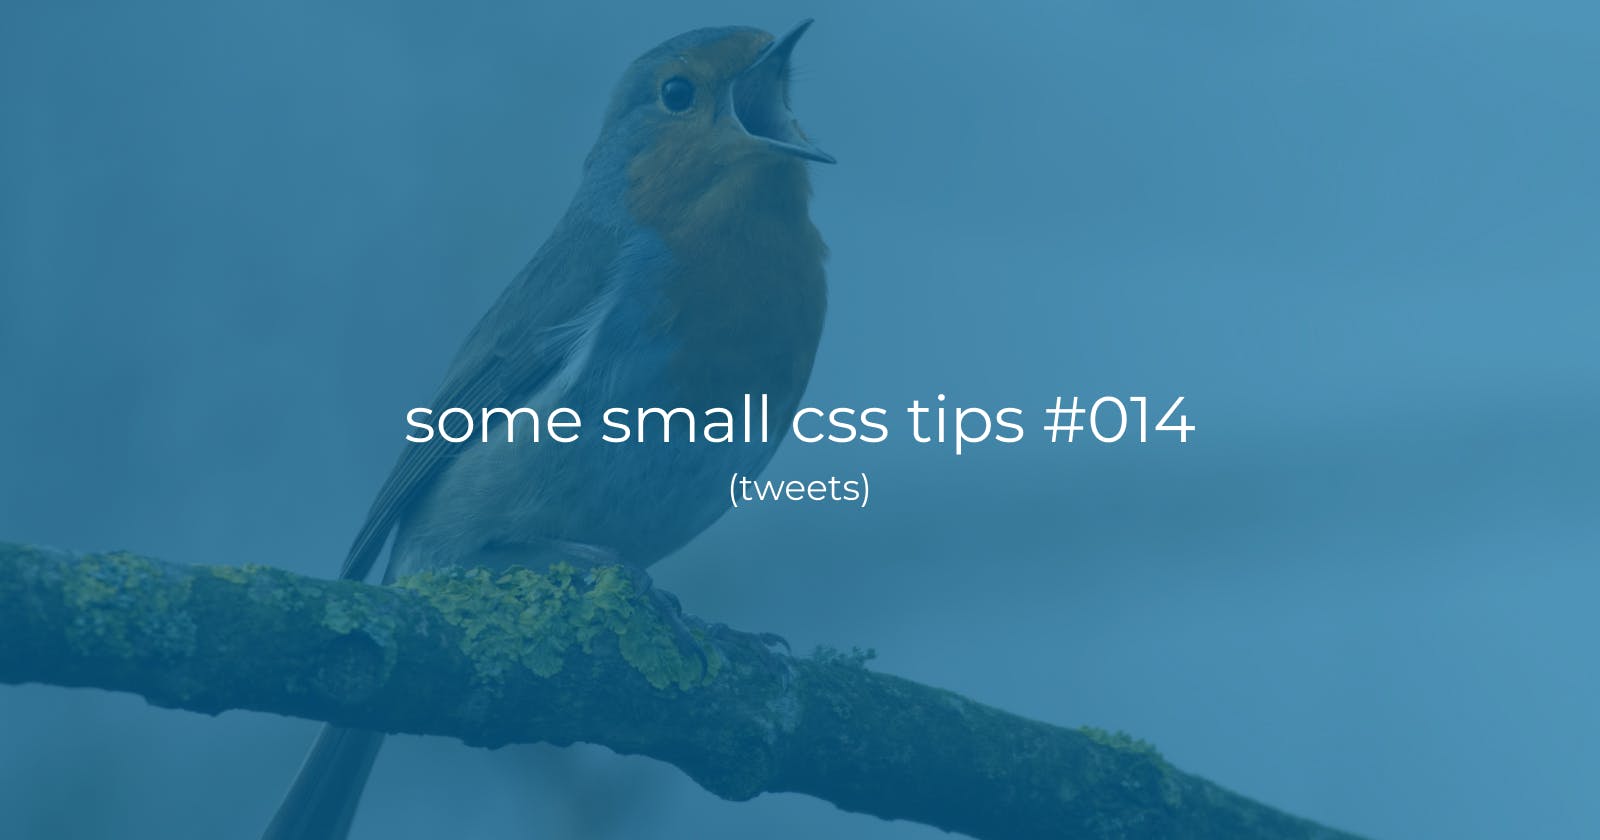 Some small Css tips #014